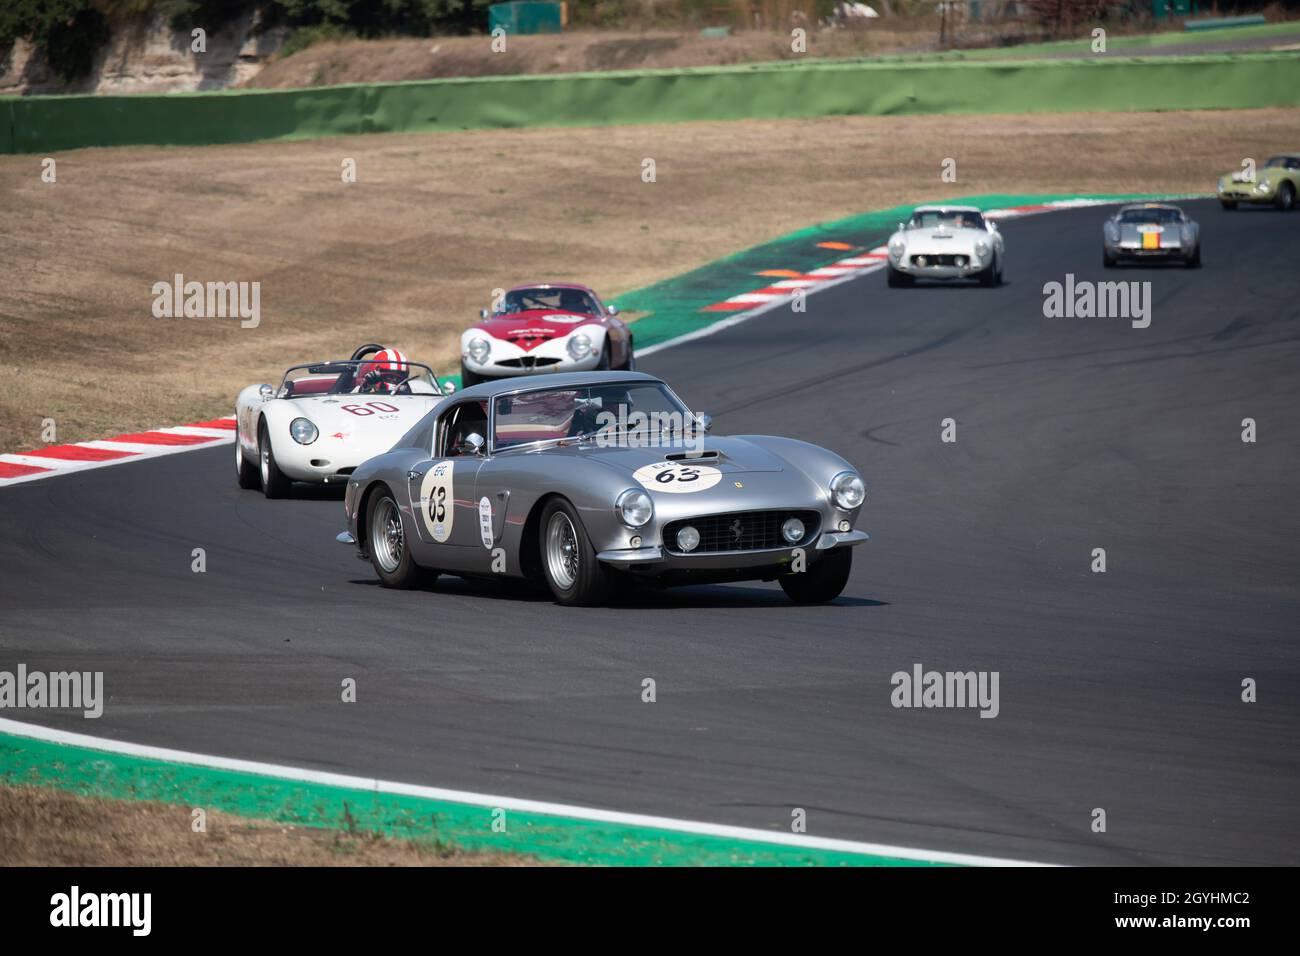 Italy, september 11 2021. Vallelunga classic. 60s vintage race car competition on racetrack, Ferrari 250 GT leading group Stock Photo